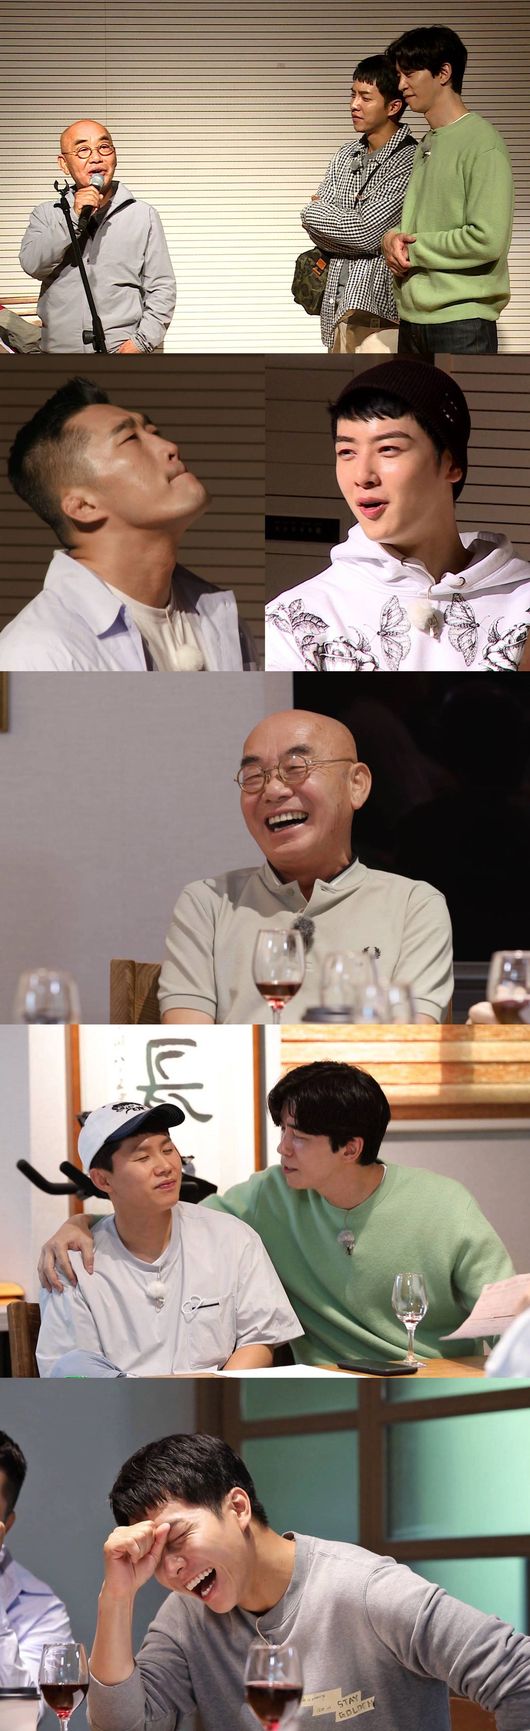 On SBS All The Butlers, which will be broadcast on the afternoon of June 13, a day with romantic master Yi Jang-hui, who keeps dreams and romance about Heaven.On this day, Yi Jang-hui, who caught up with the Korean music industry in the 70s and 80s, will be the master.Yi Jang-hui invited the members directly to his home in Ulleungdo; the members were appalled by the sight of the sight as soon as they entered the garden.Even Egret was located in the worlds largest garden and pond.In particular, Lee Seung-gi expressed his awe of Master, saying, I heard that the scale is different, but it is this much.Master Yi Jang-hui also surprised all members by revealing that he had been a solo president with the US president in the past.He is the back door of an incredible spectacular life Kahaani, which made the scene buzz by telling him casually.On the other hand, Yi Jang-hui had time to talk with the members about three conditions that make my life Heaven.One of the members said that he needed superpower for Heaven, and made the scene into a laughing sea.Master then sang the hit song When My Age is Sixty and One and thought about the meaning of life with the members.Through a genuine conversation with Master, the members wonder what they would have thought.The story of romantic master Yi Jang-hui, who realized the Heaven in Ulleungdo with a dream about Heaven, can be found on SBS All The Butlers broadcasted at 6:25 pm on the 13th.SBS